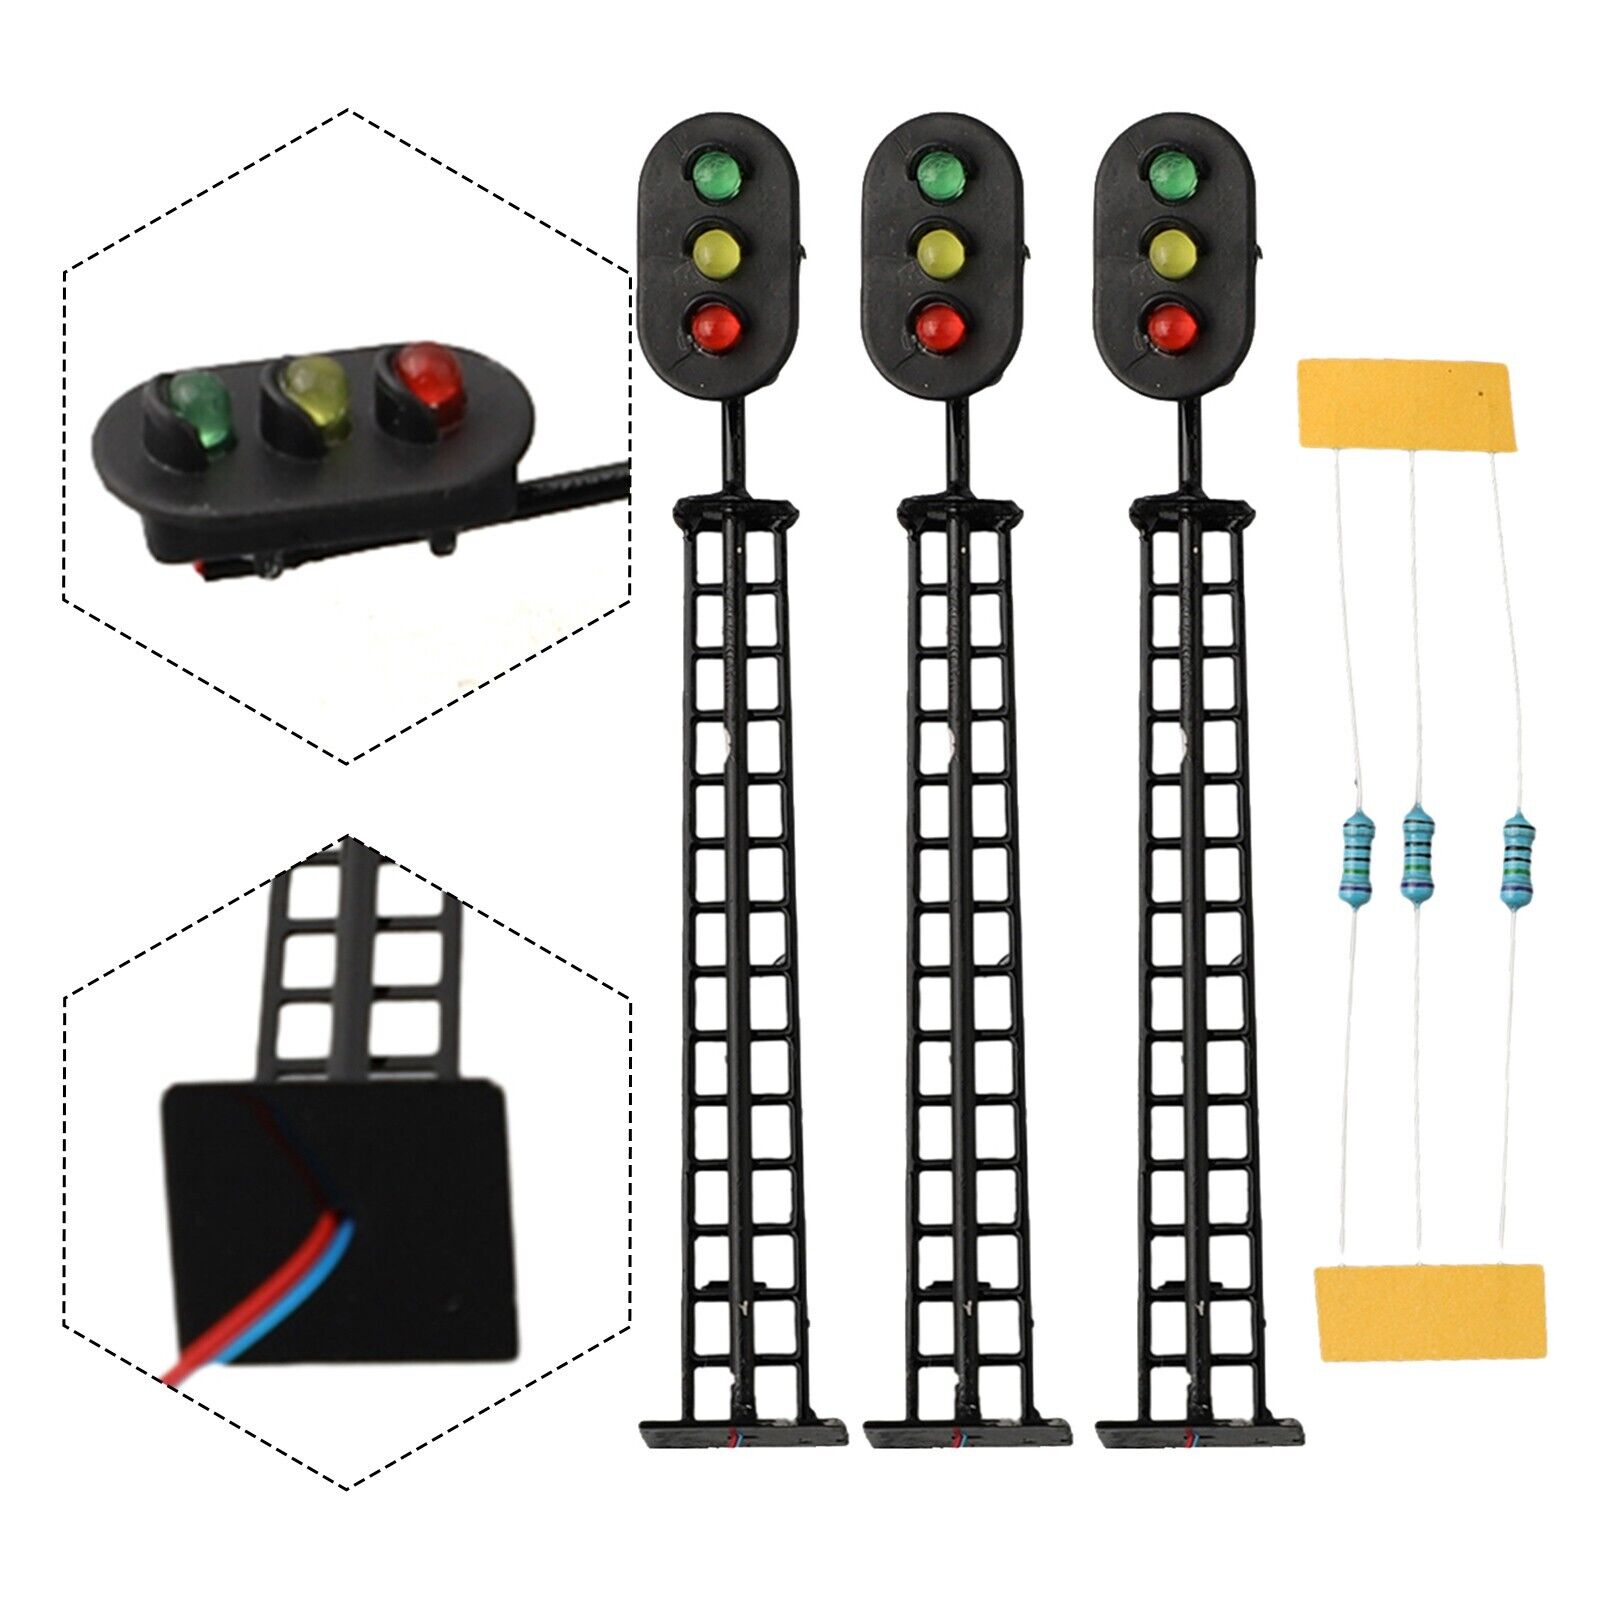 Transport Railway Signal Light Top Sale 20mA 3V/12V ABS+Metal Accessories